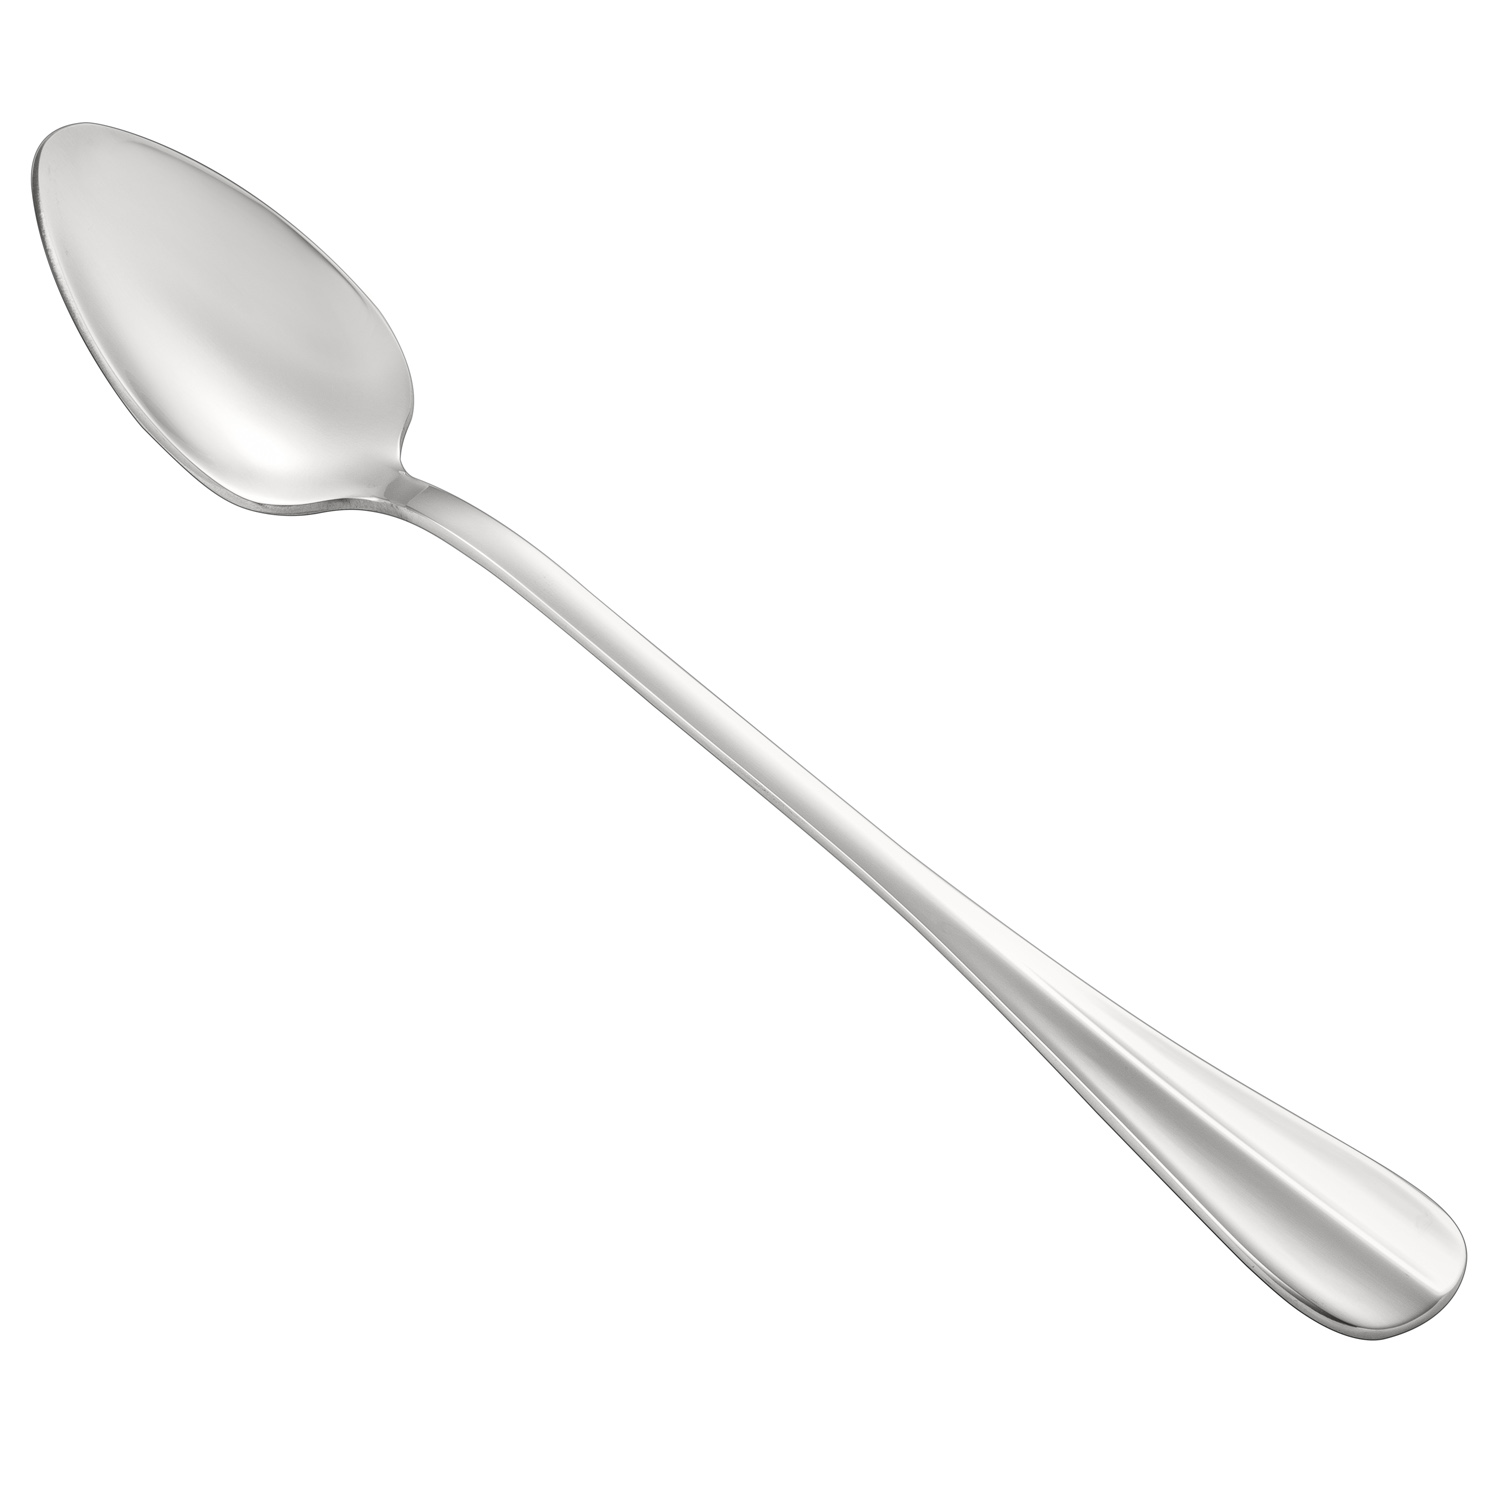 CAC China 8005-02 Exquisite Iced Tea Spoon, Extra Heavyweight 18/8, 7 3/8"